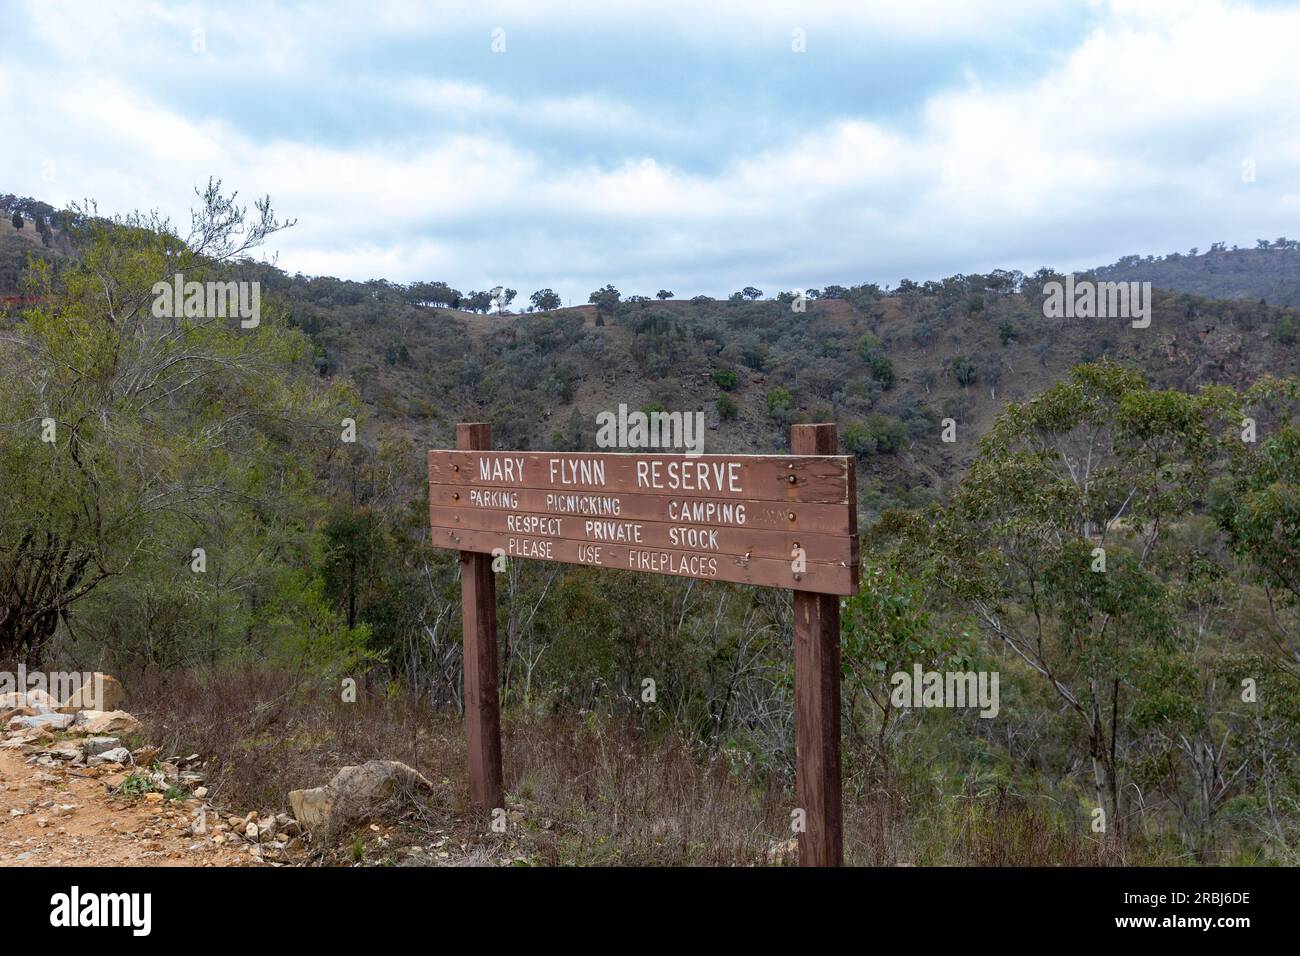 Mary Flynn Reserve camping ground area on the Hill End Bridle track famous trail during gold mining boom, New South Wales,Australia Stock Photo